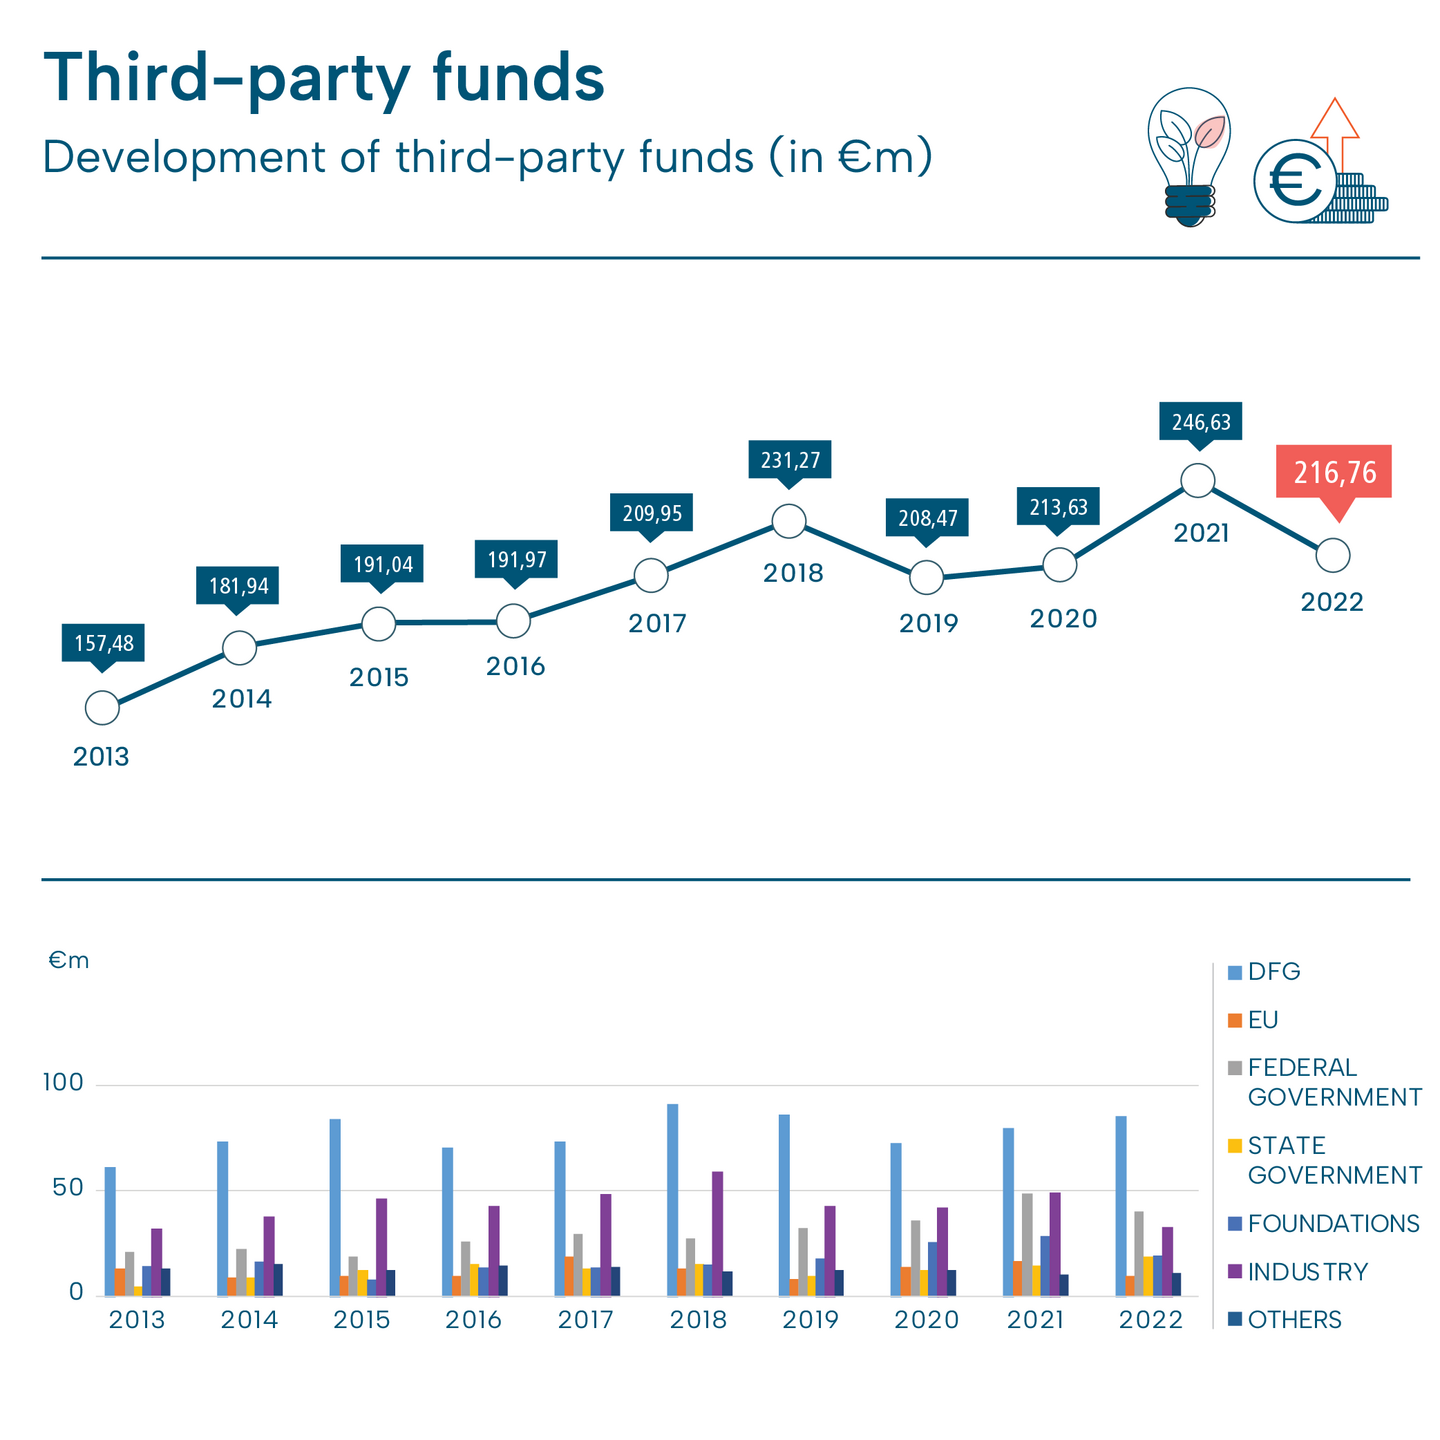 Third-party funds